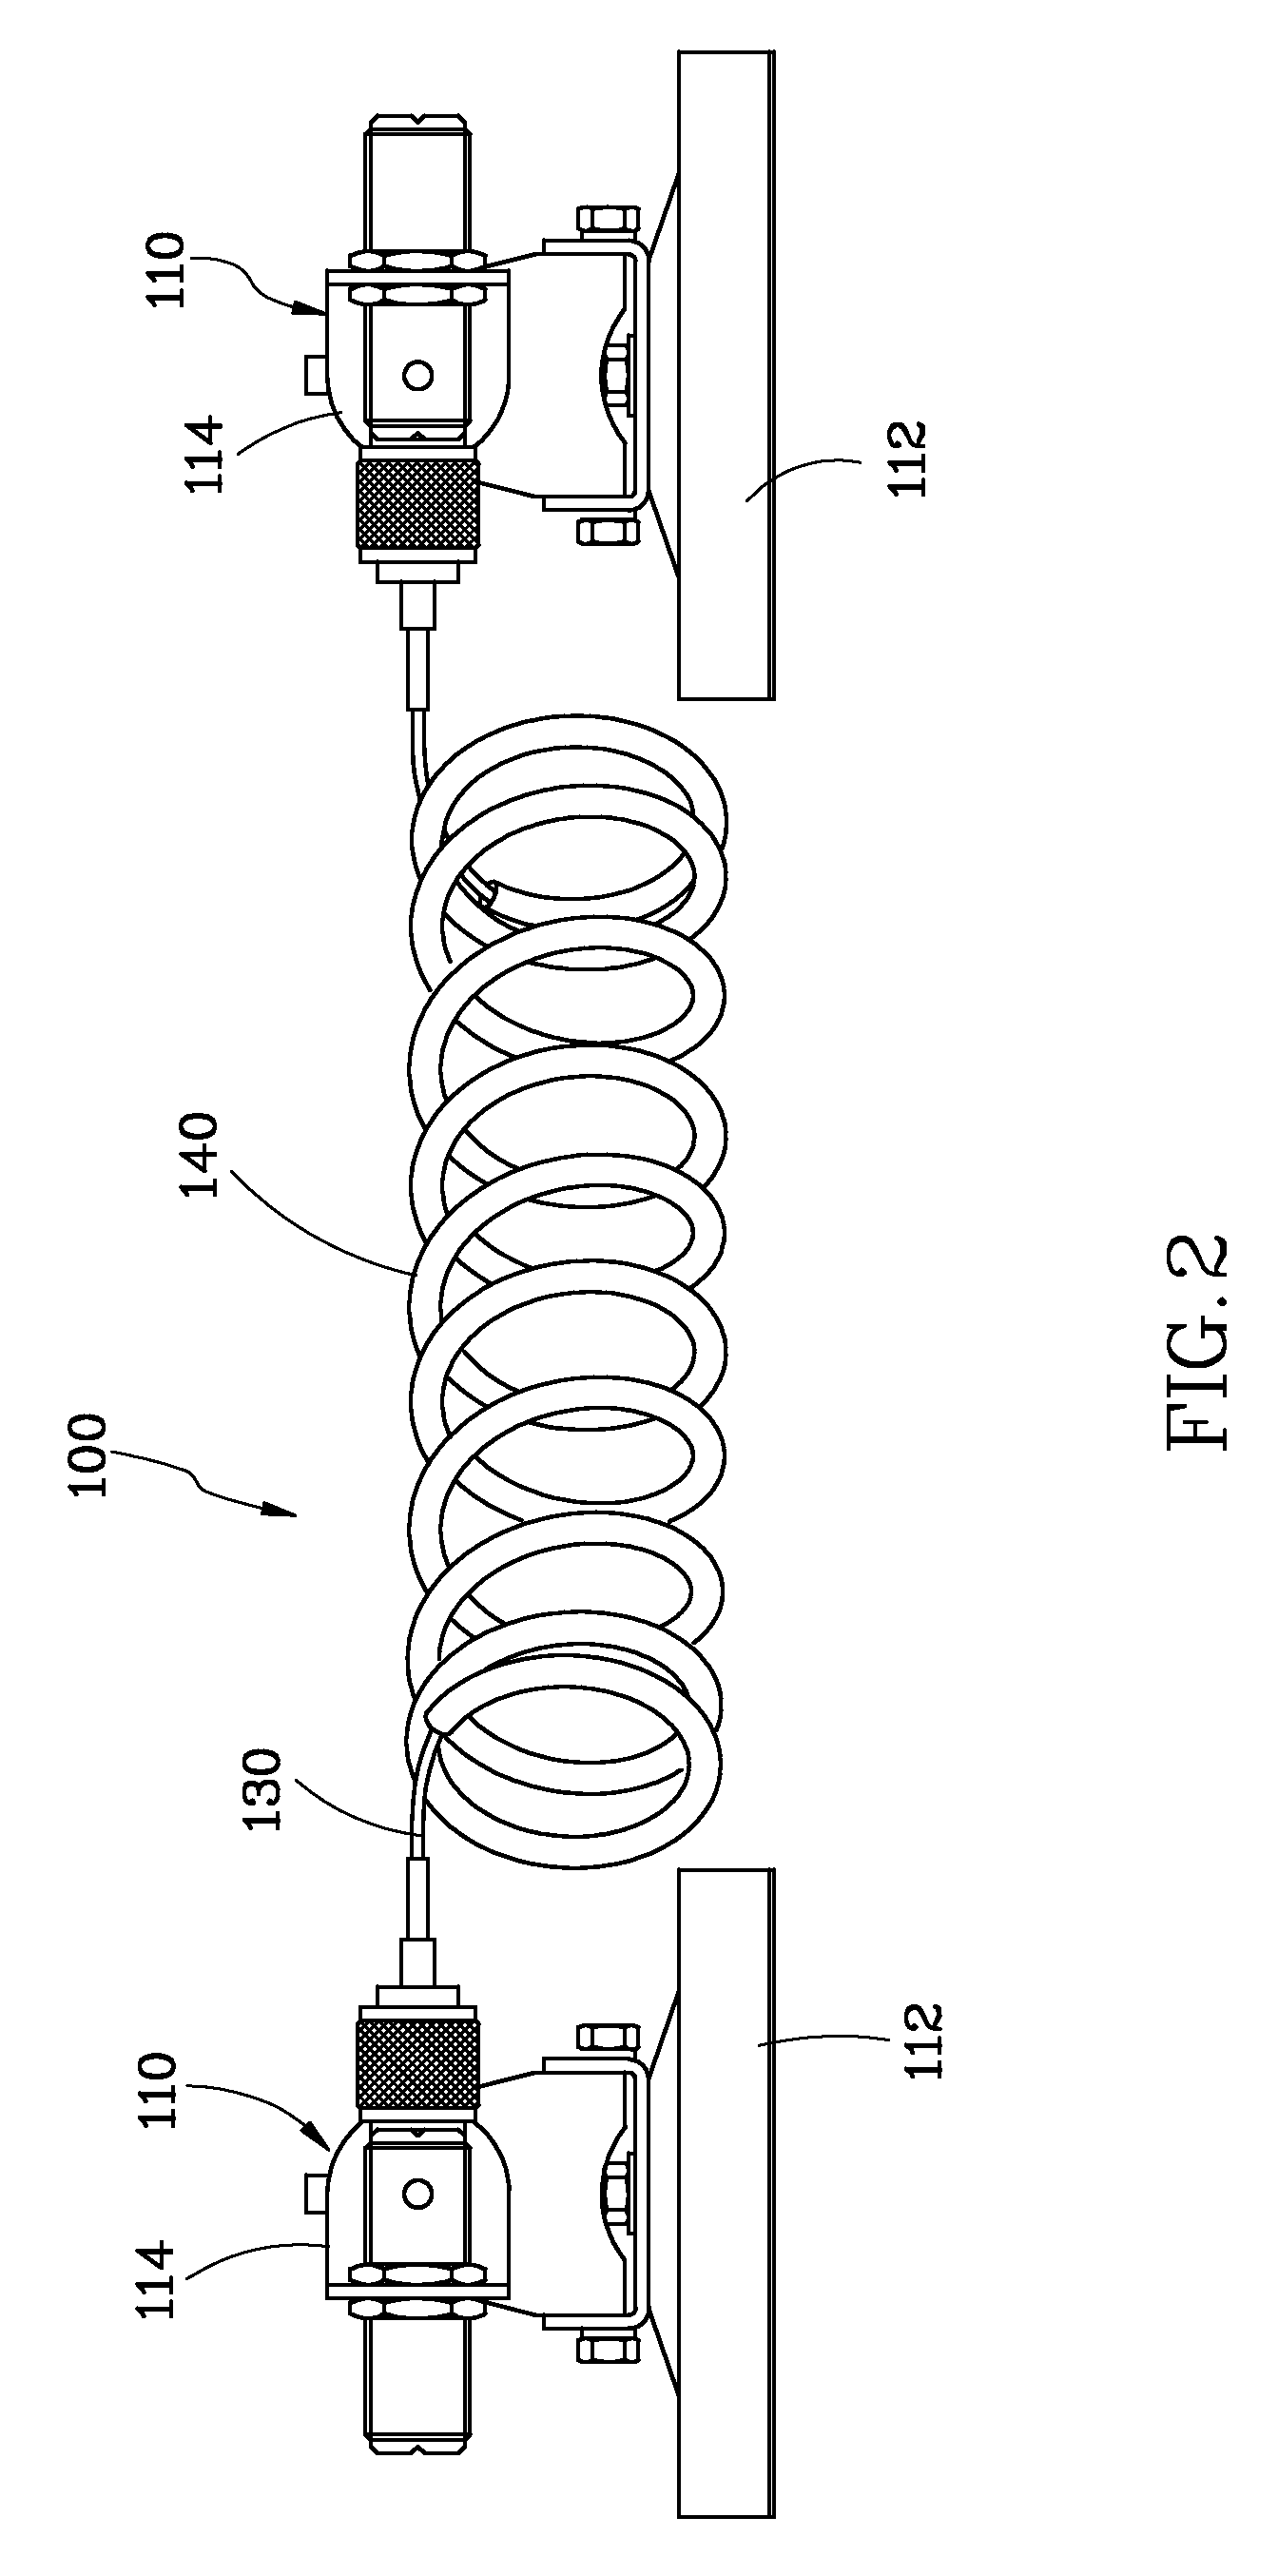 Signal transmission device for towing vehicle